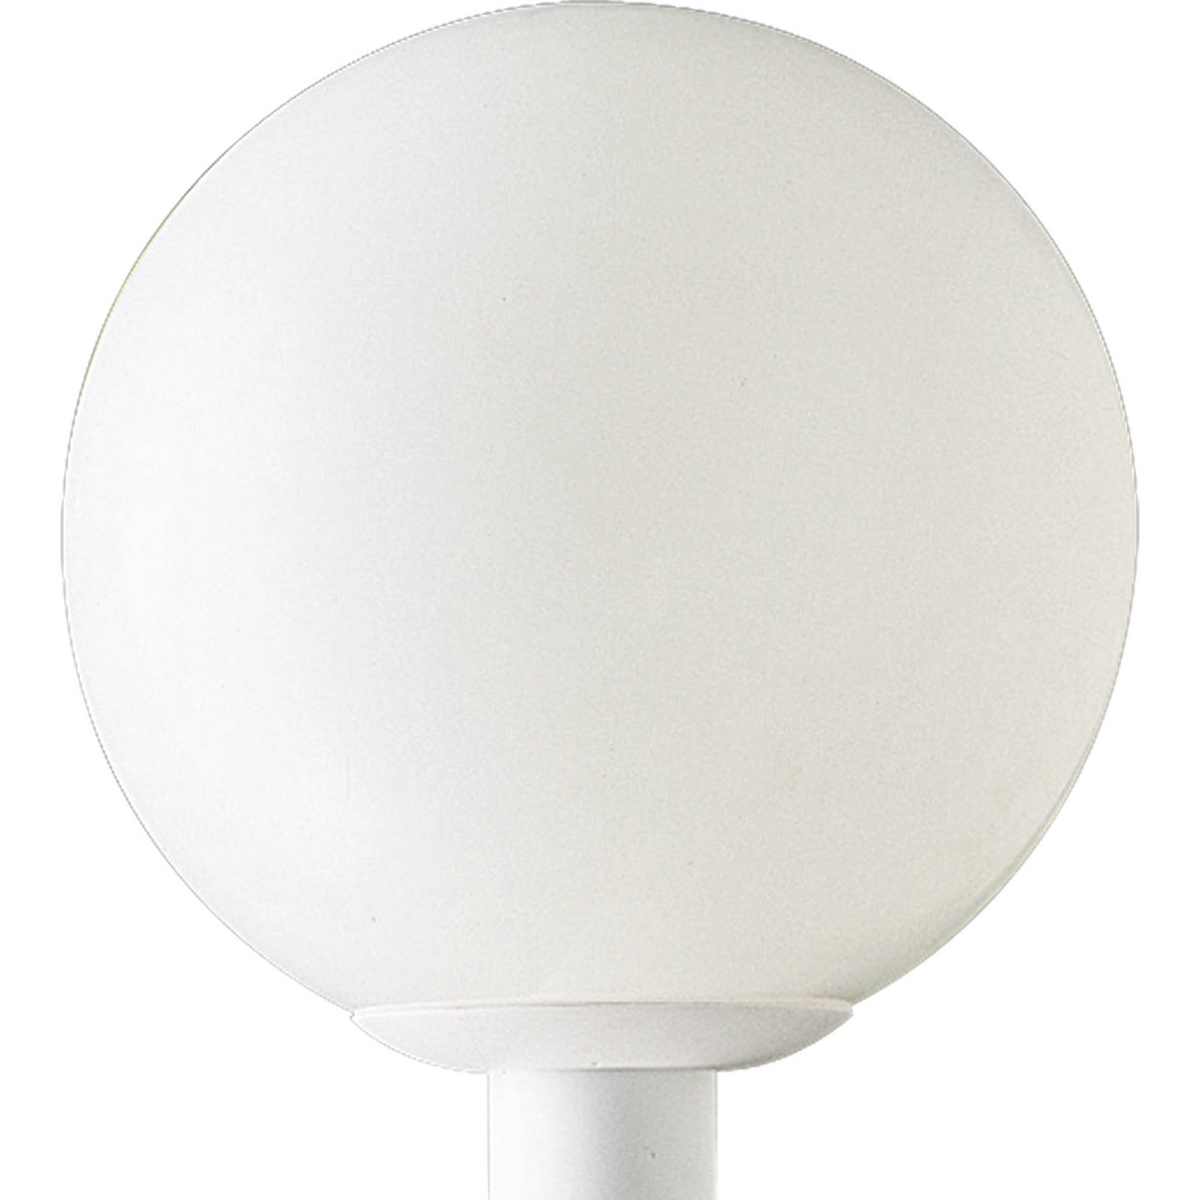 12 inch post lantern featuring a white shatter-resistant acrylic globe and a white fitter.